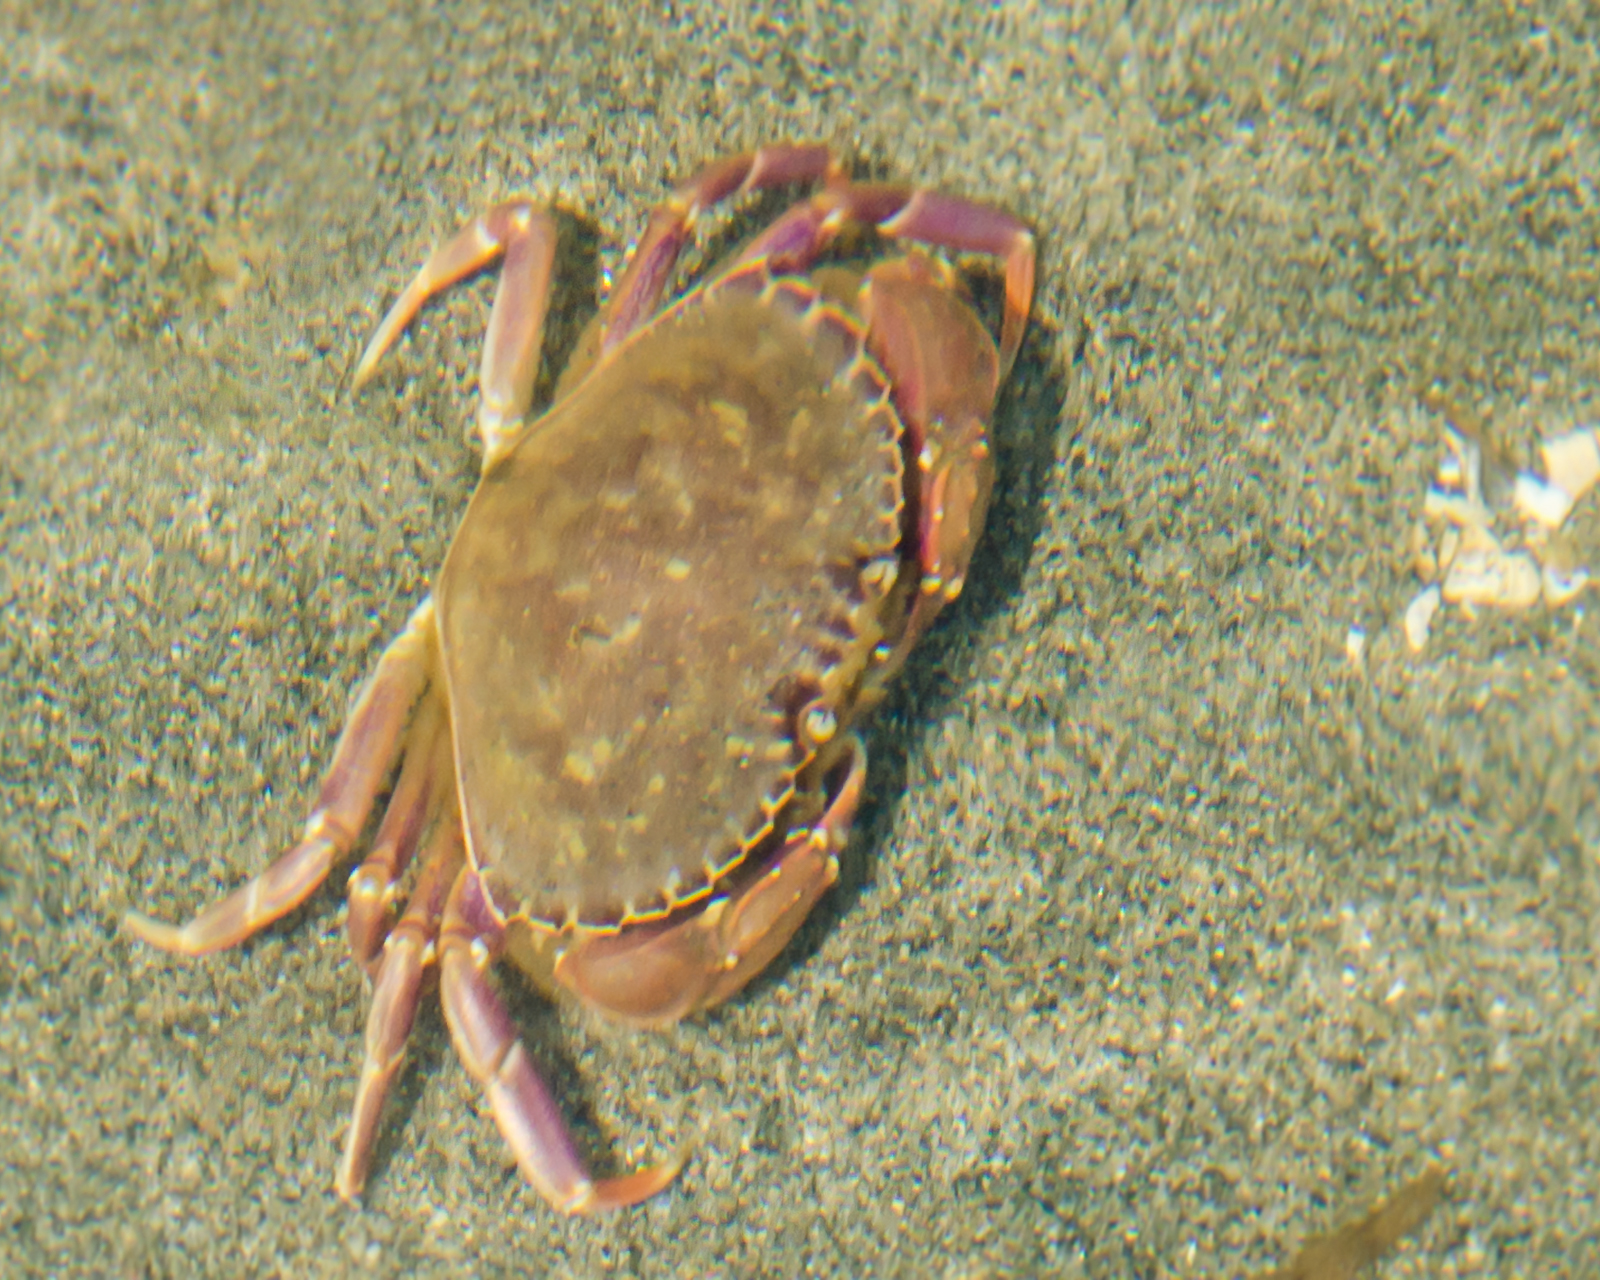 Wanderin' Weeta (With Waterfowl and Weeds): And a couple more crabs